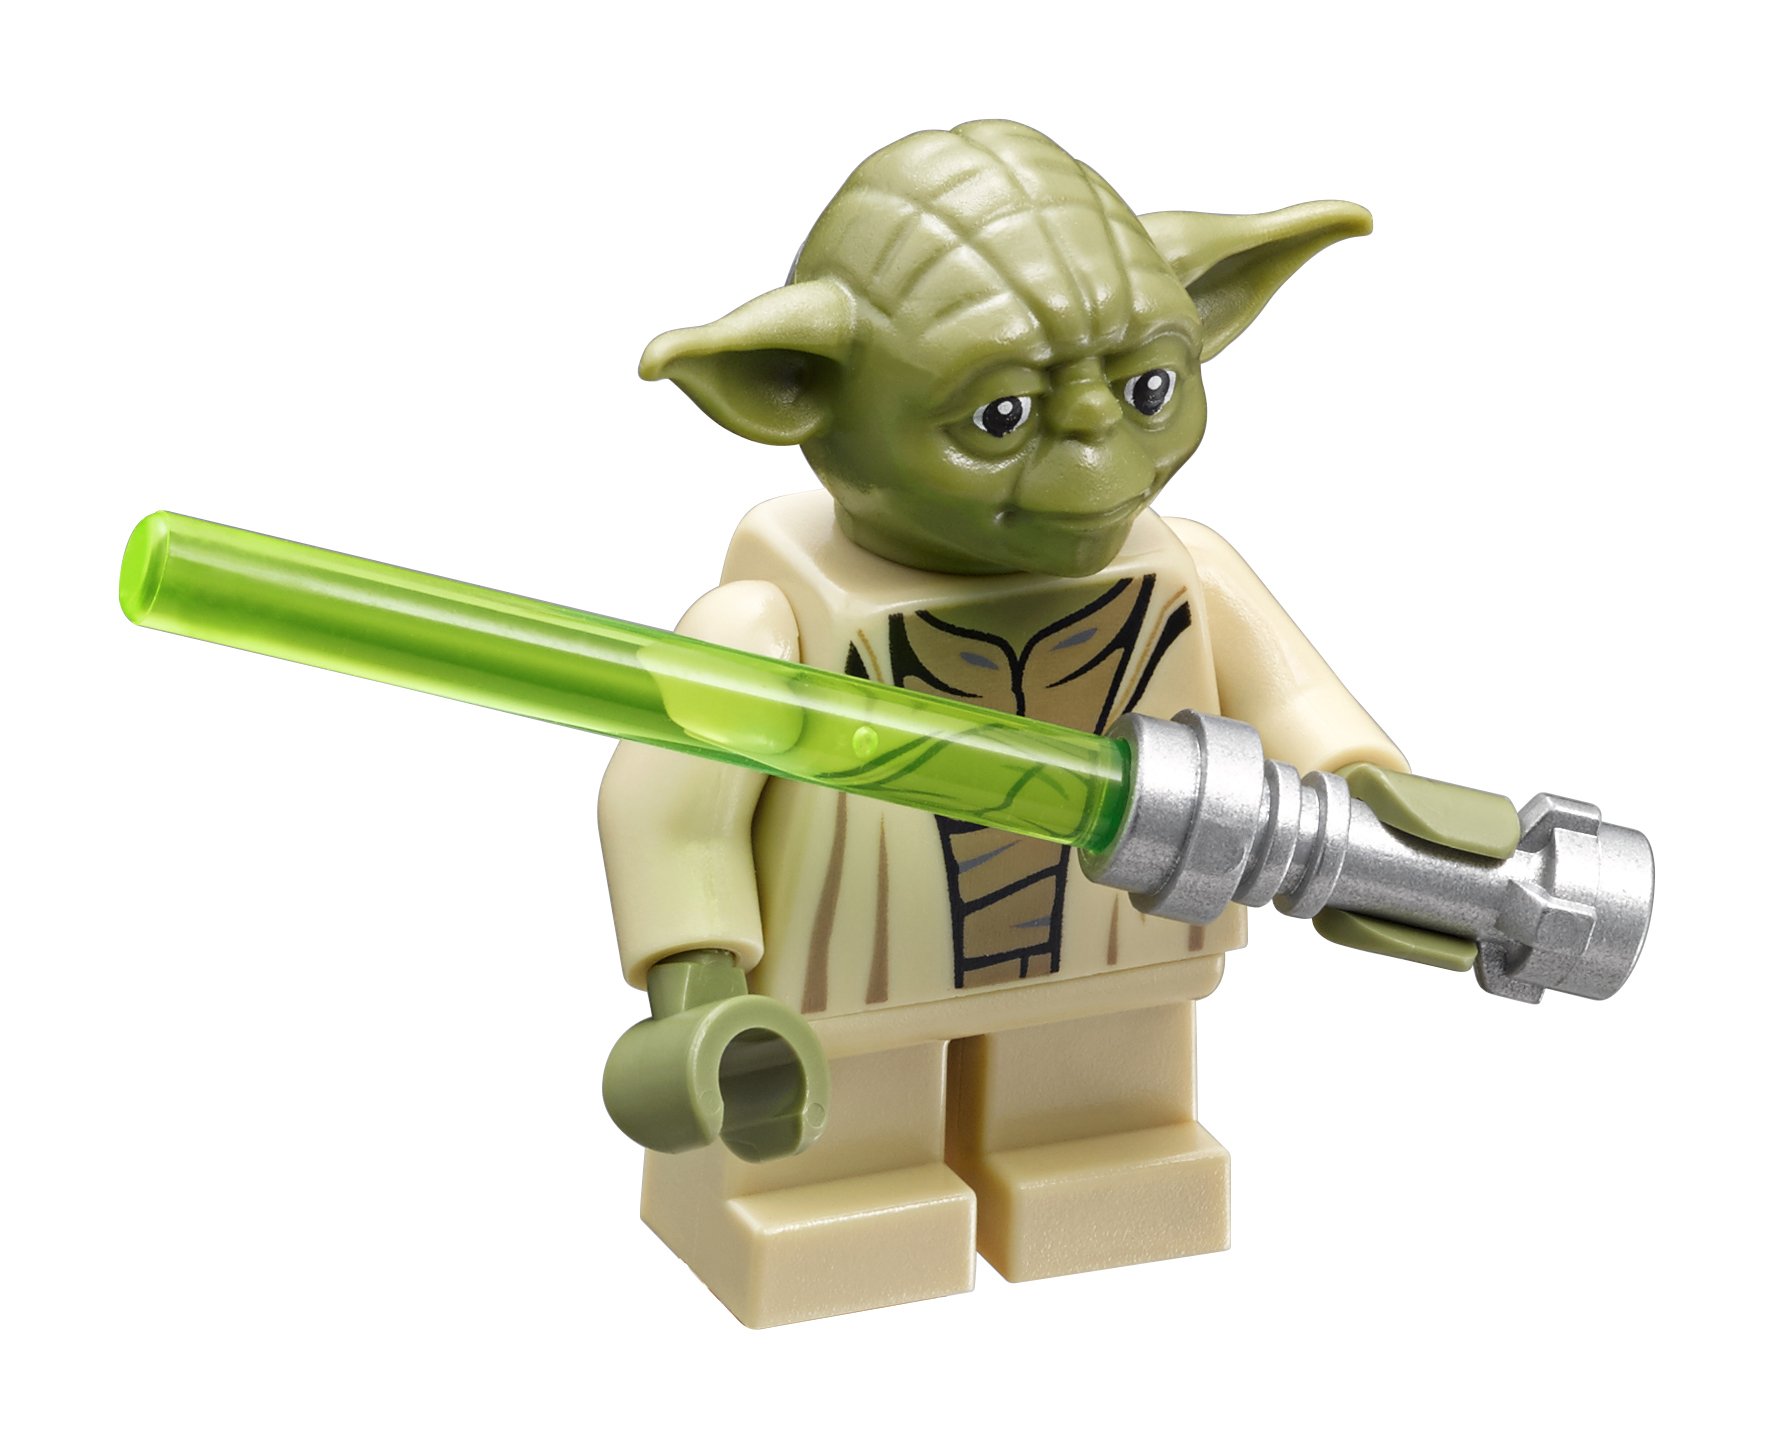 LEGO Star Wars Yoda's Jedi Starfighter 75168 Building Kit for 96 months to 144 months (262 Pieces)